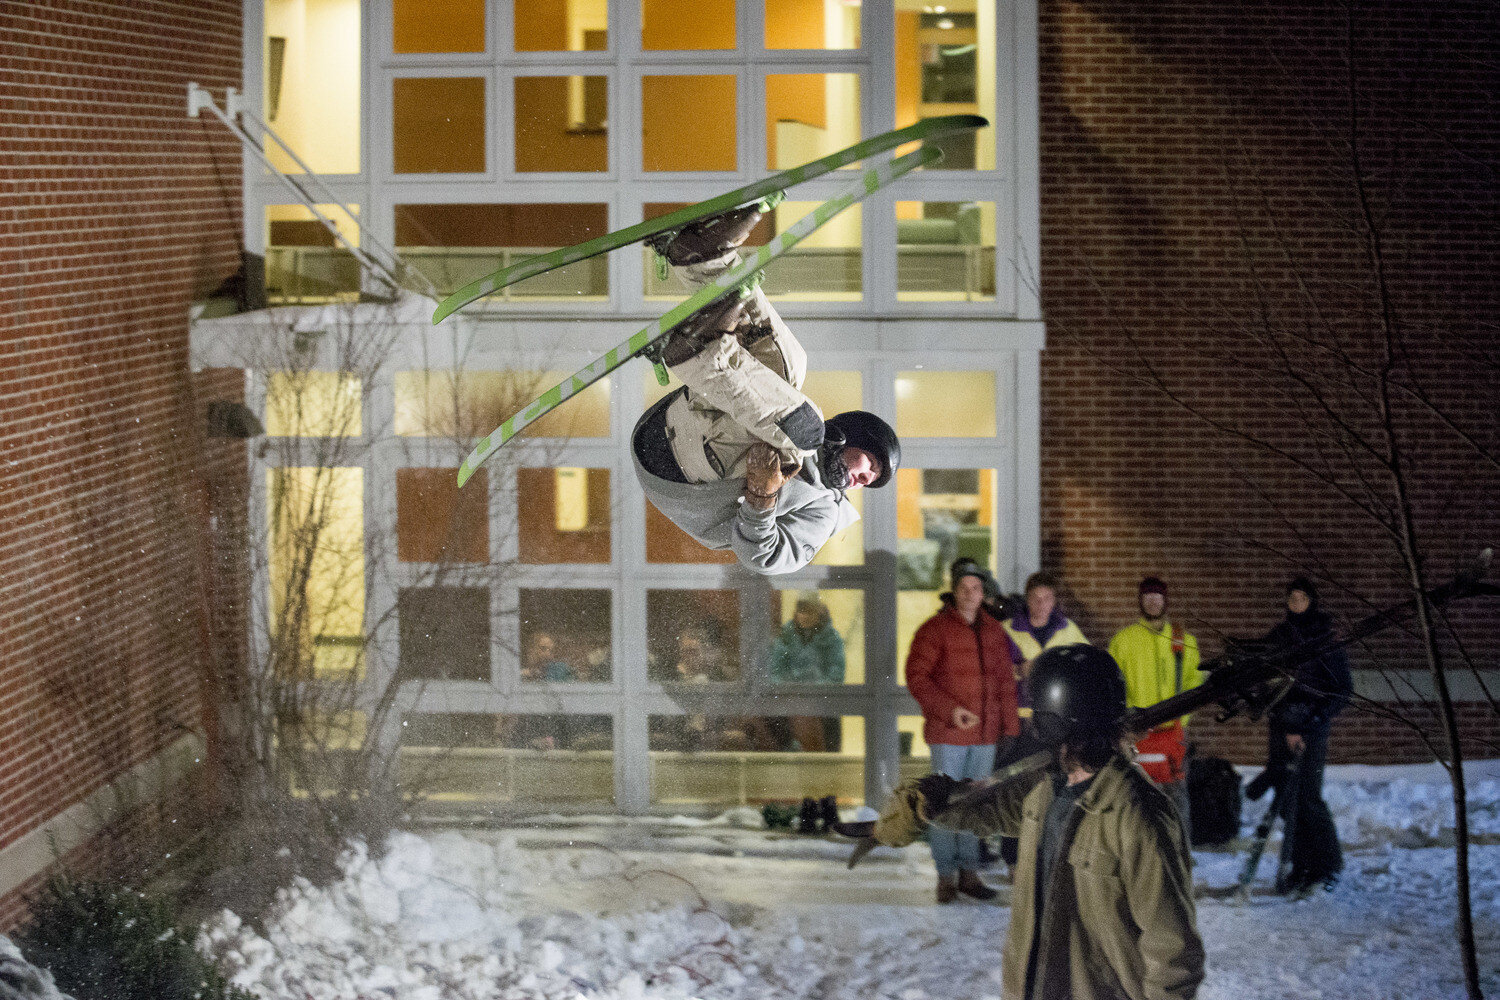  Patrick Sheils eyes the landing for his flip as the Bates Shred Club hosts "Skill 'N Grill," a featured event for Winter Carnival on Wednesday, Jan 20 2016 in Lewiston, ME. 